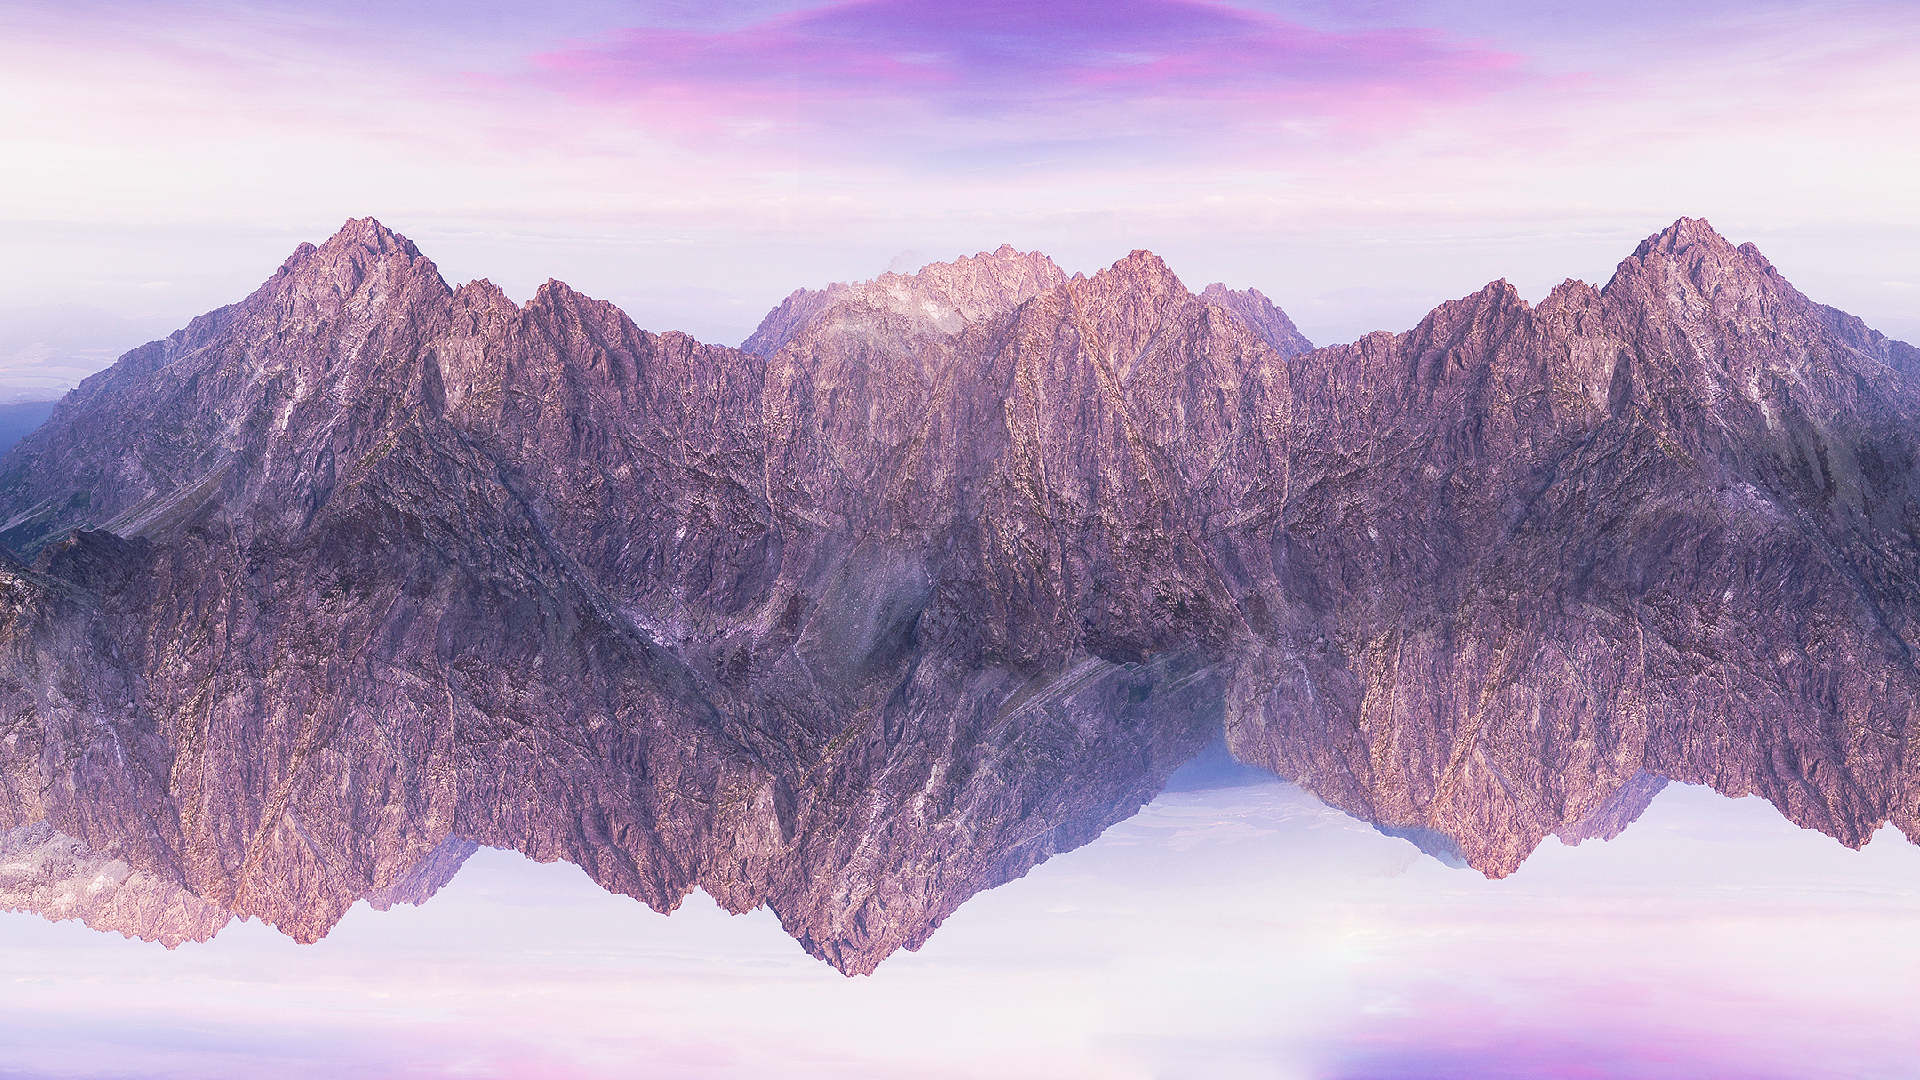 General 1920x1080 mountains purple hills nature reflection water